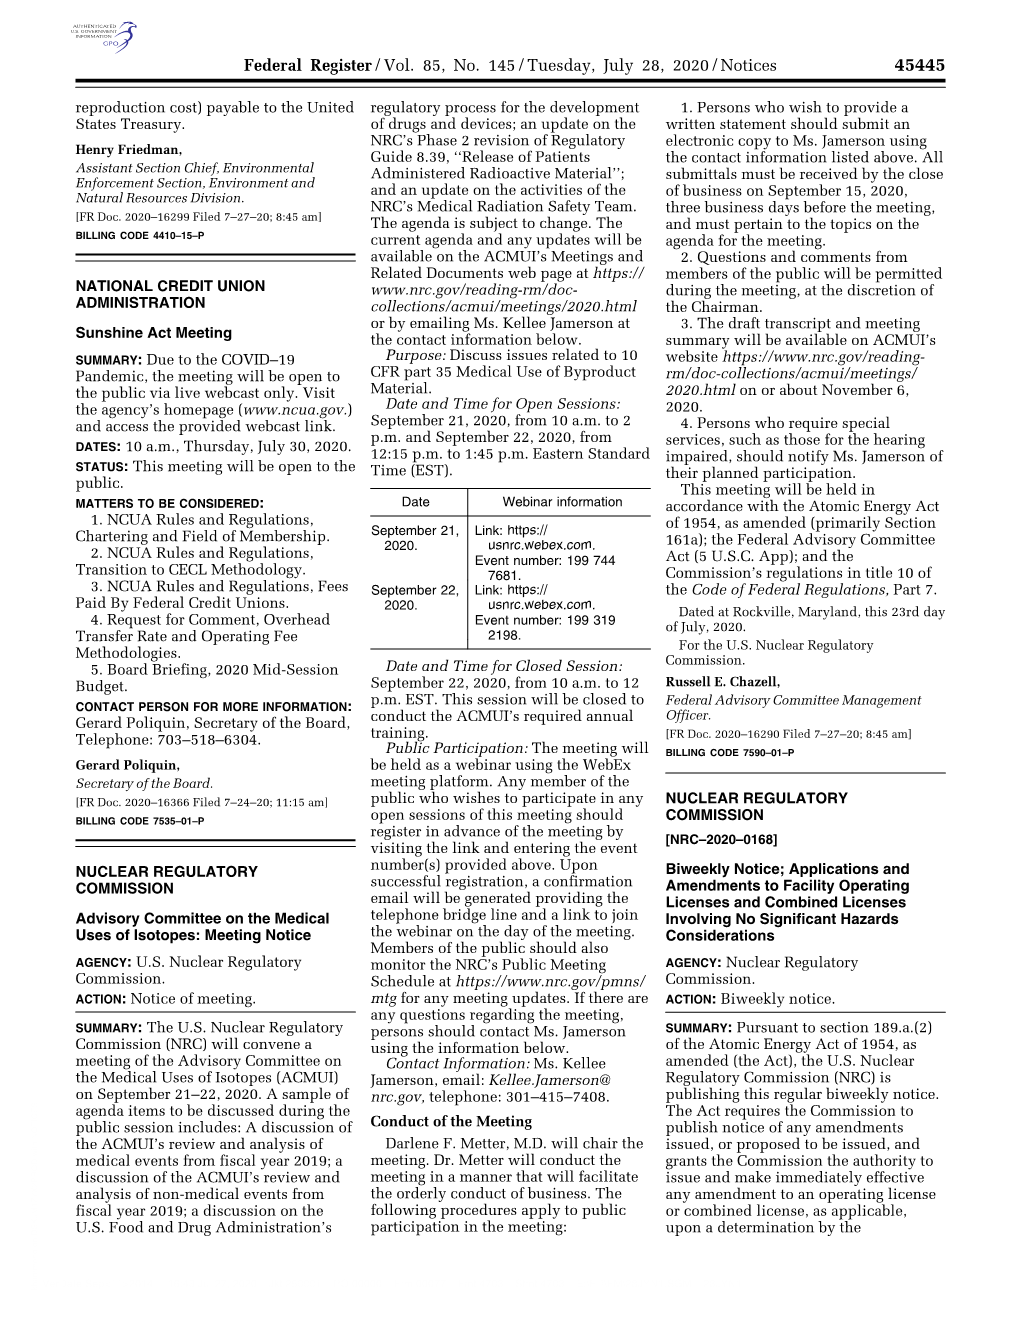 Federal Register/Vol. 85, No. 145/Tuesday, July 28, 2020/Notices